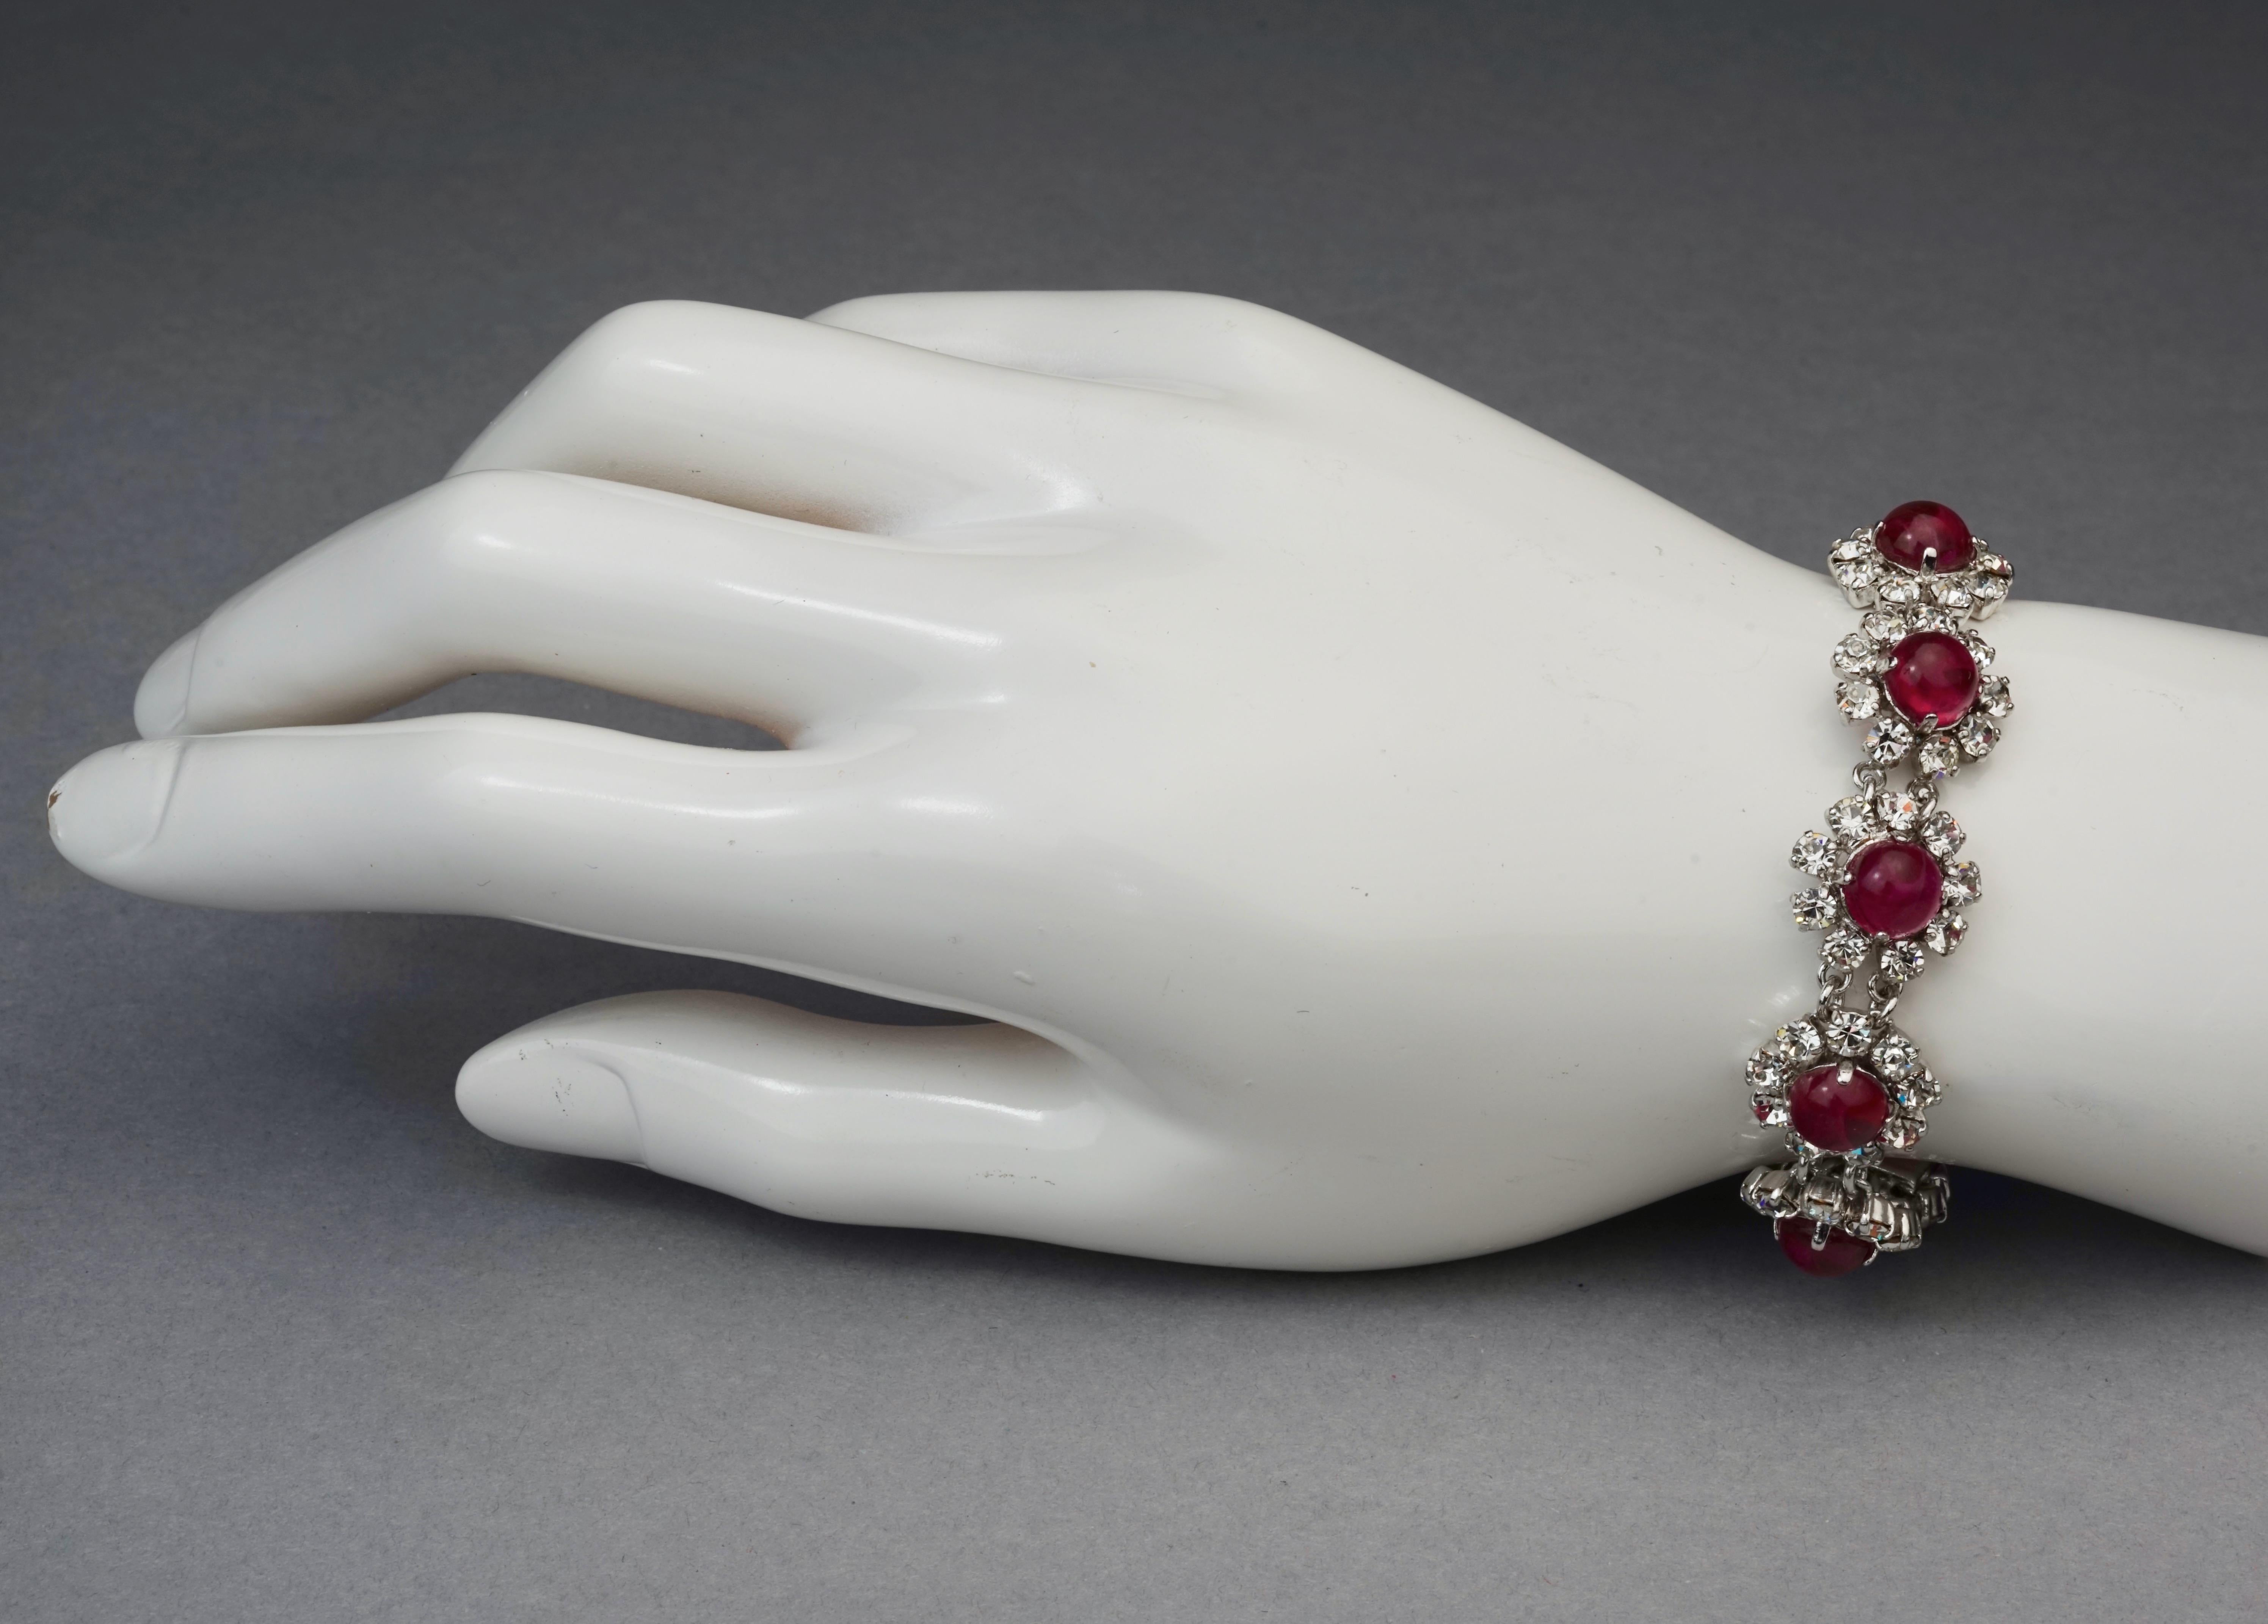 Vintage 1973 CHRISTIAN DIOR Red Glass Cabochon Rhinestone Bracelet

Measurements:
Height: 0.63 inch (1.6 cm)
Wearable Length: 7.08 inches (18 cm)

Features:
- 100% Authentic CHRISTIAN DIOR.
- Red round glass cabochon with rhinestones link